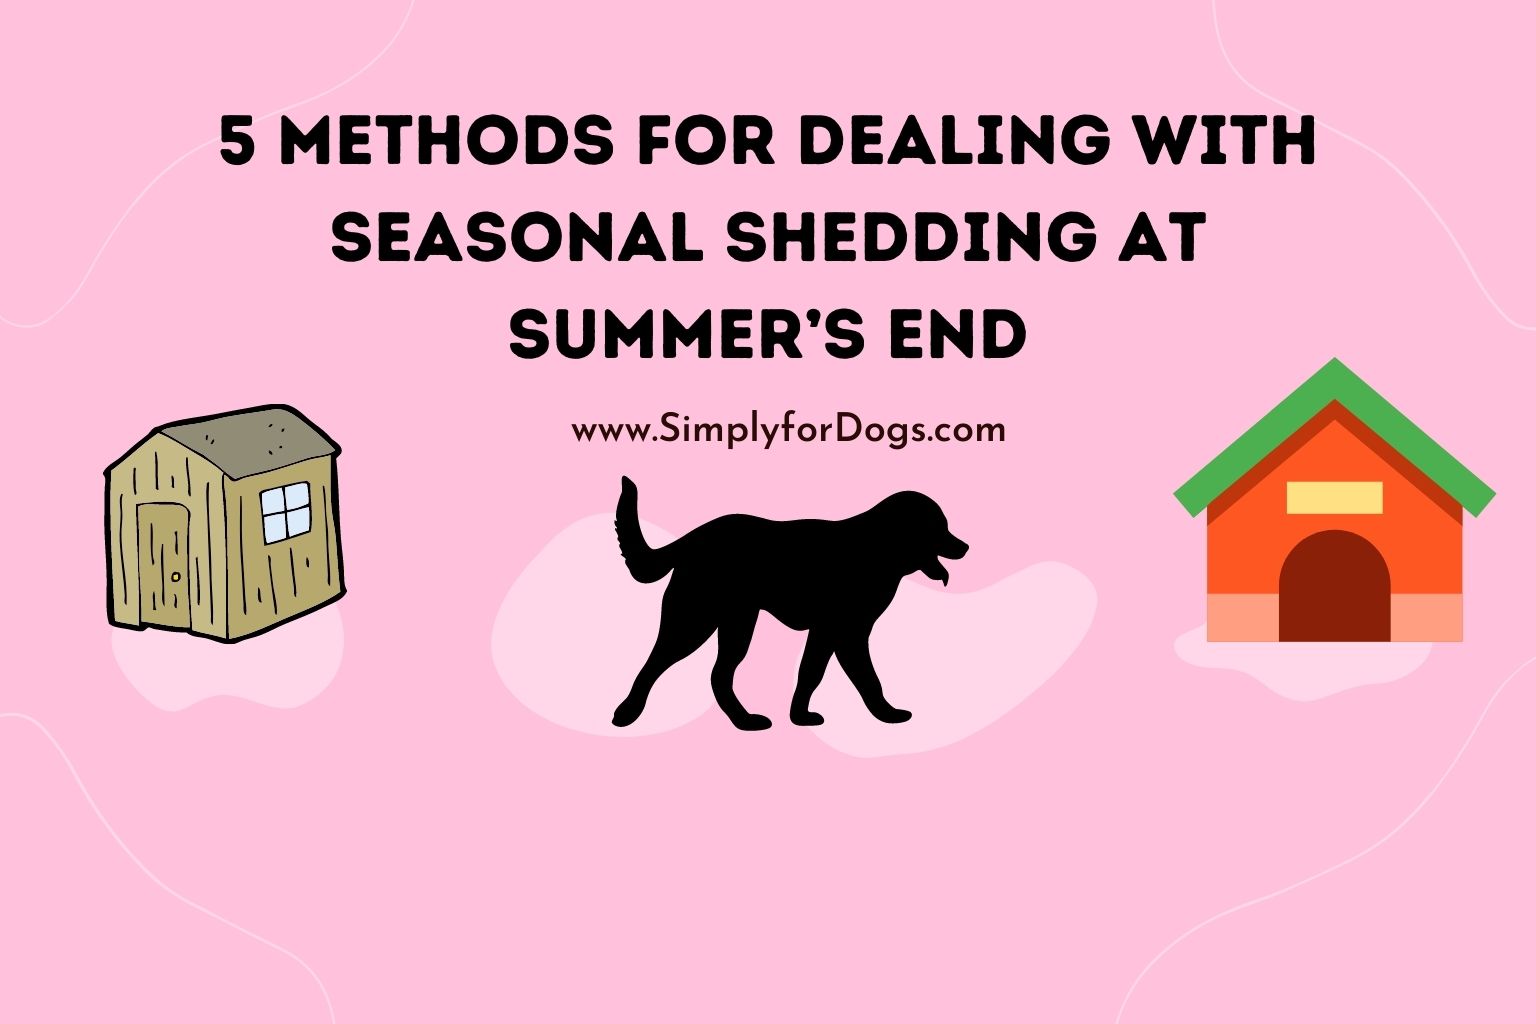 5 Methods for Dealing with Seasonal Shedding at Summer’s End